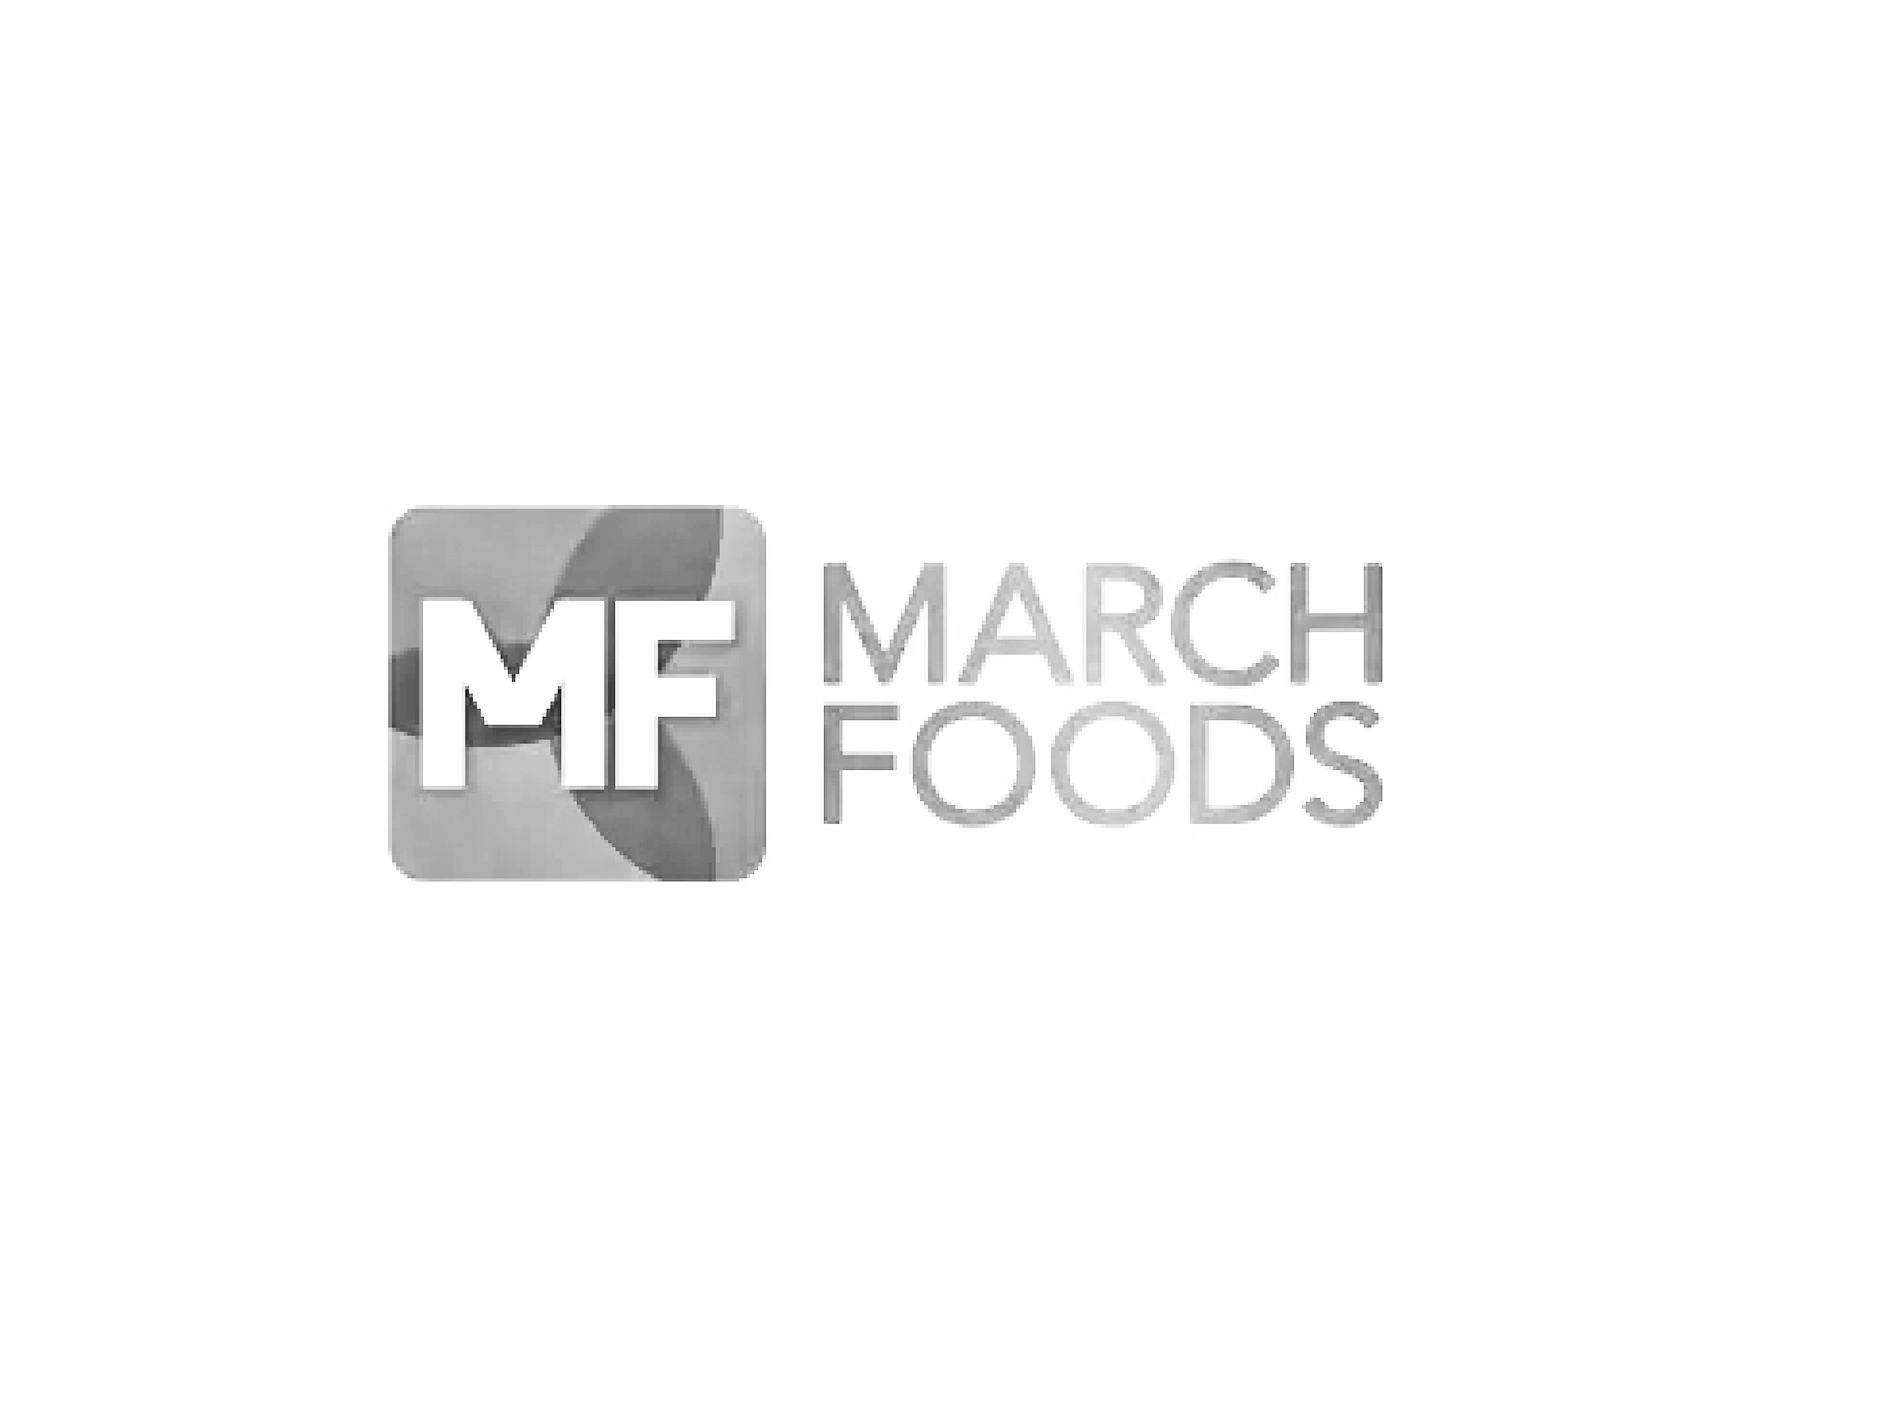 March foods grey